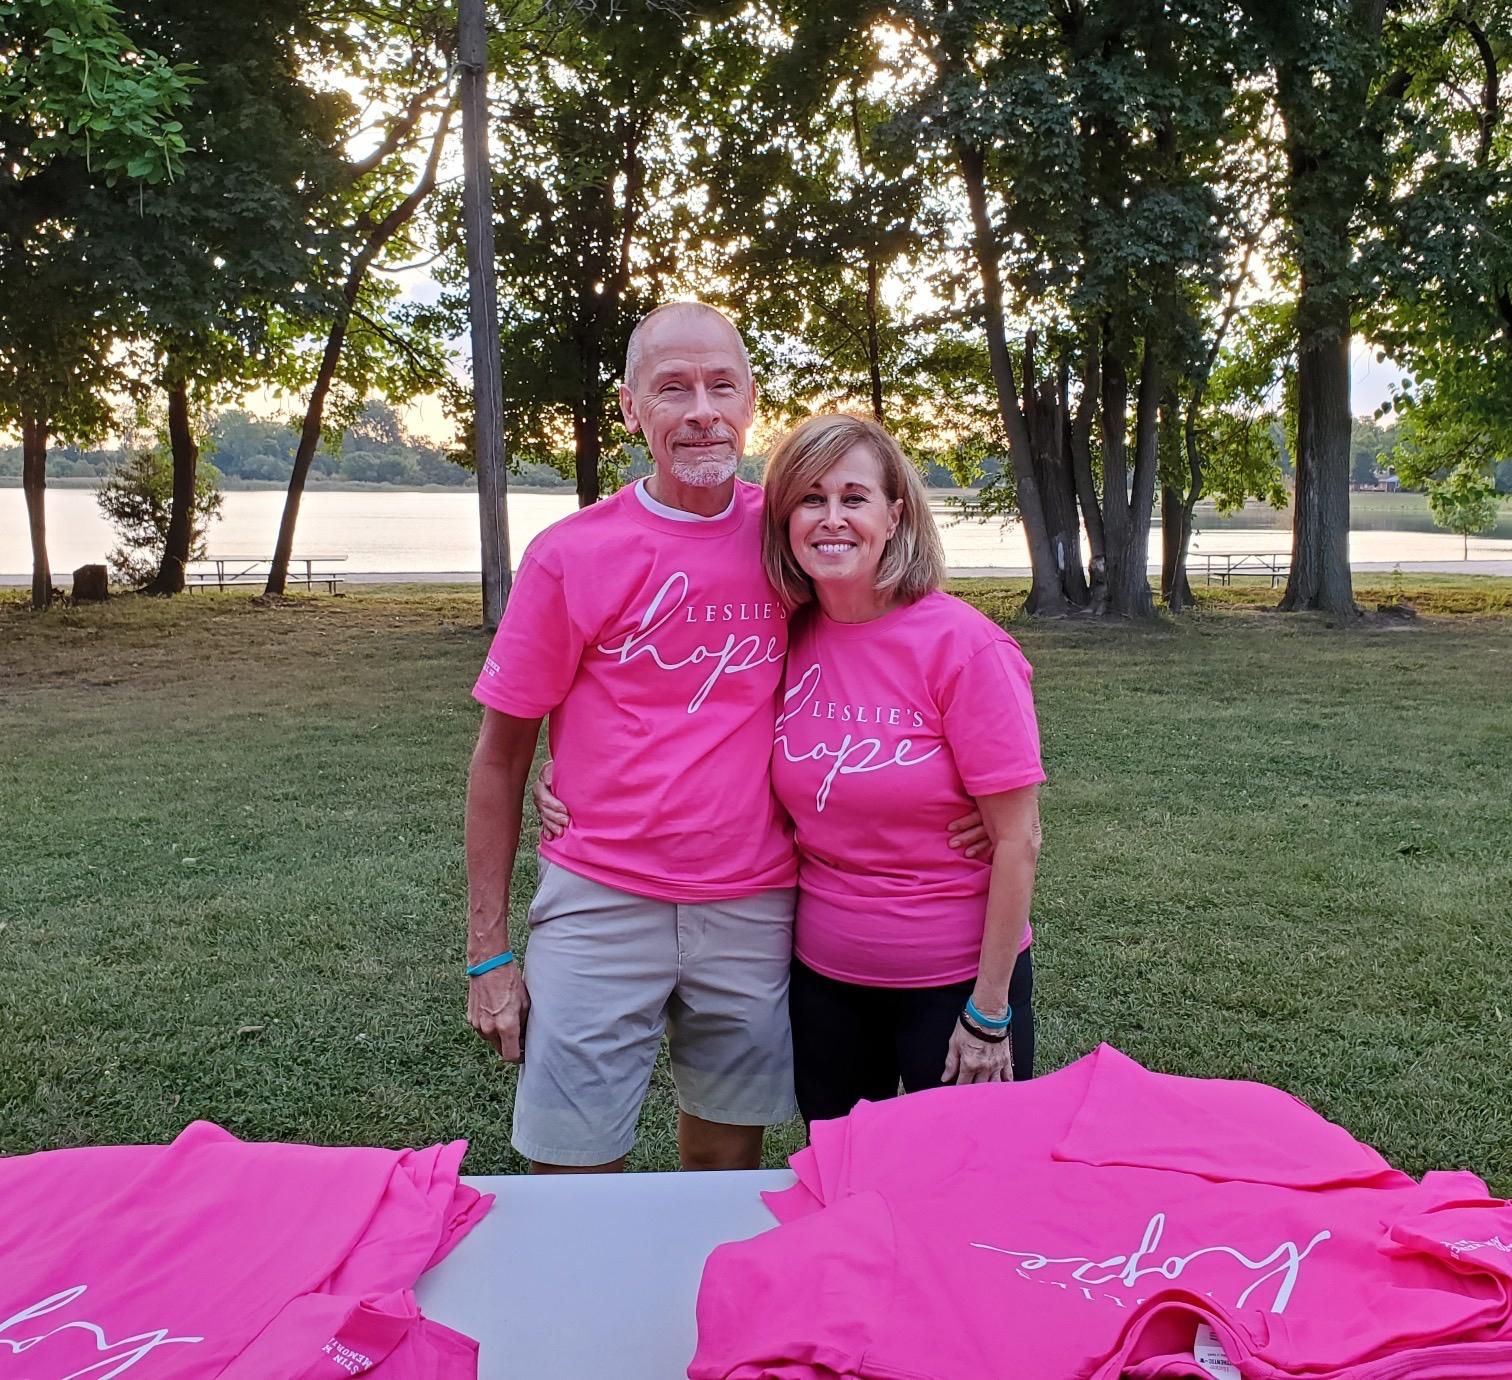 Keith and Leslie Weirich at the Inaugural Austin Weirich Memorial 5K in September 2021. They raised $11,000 for the scholarship fund at Austinu2019s high school in Goshen, Indiana.